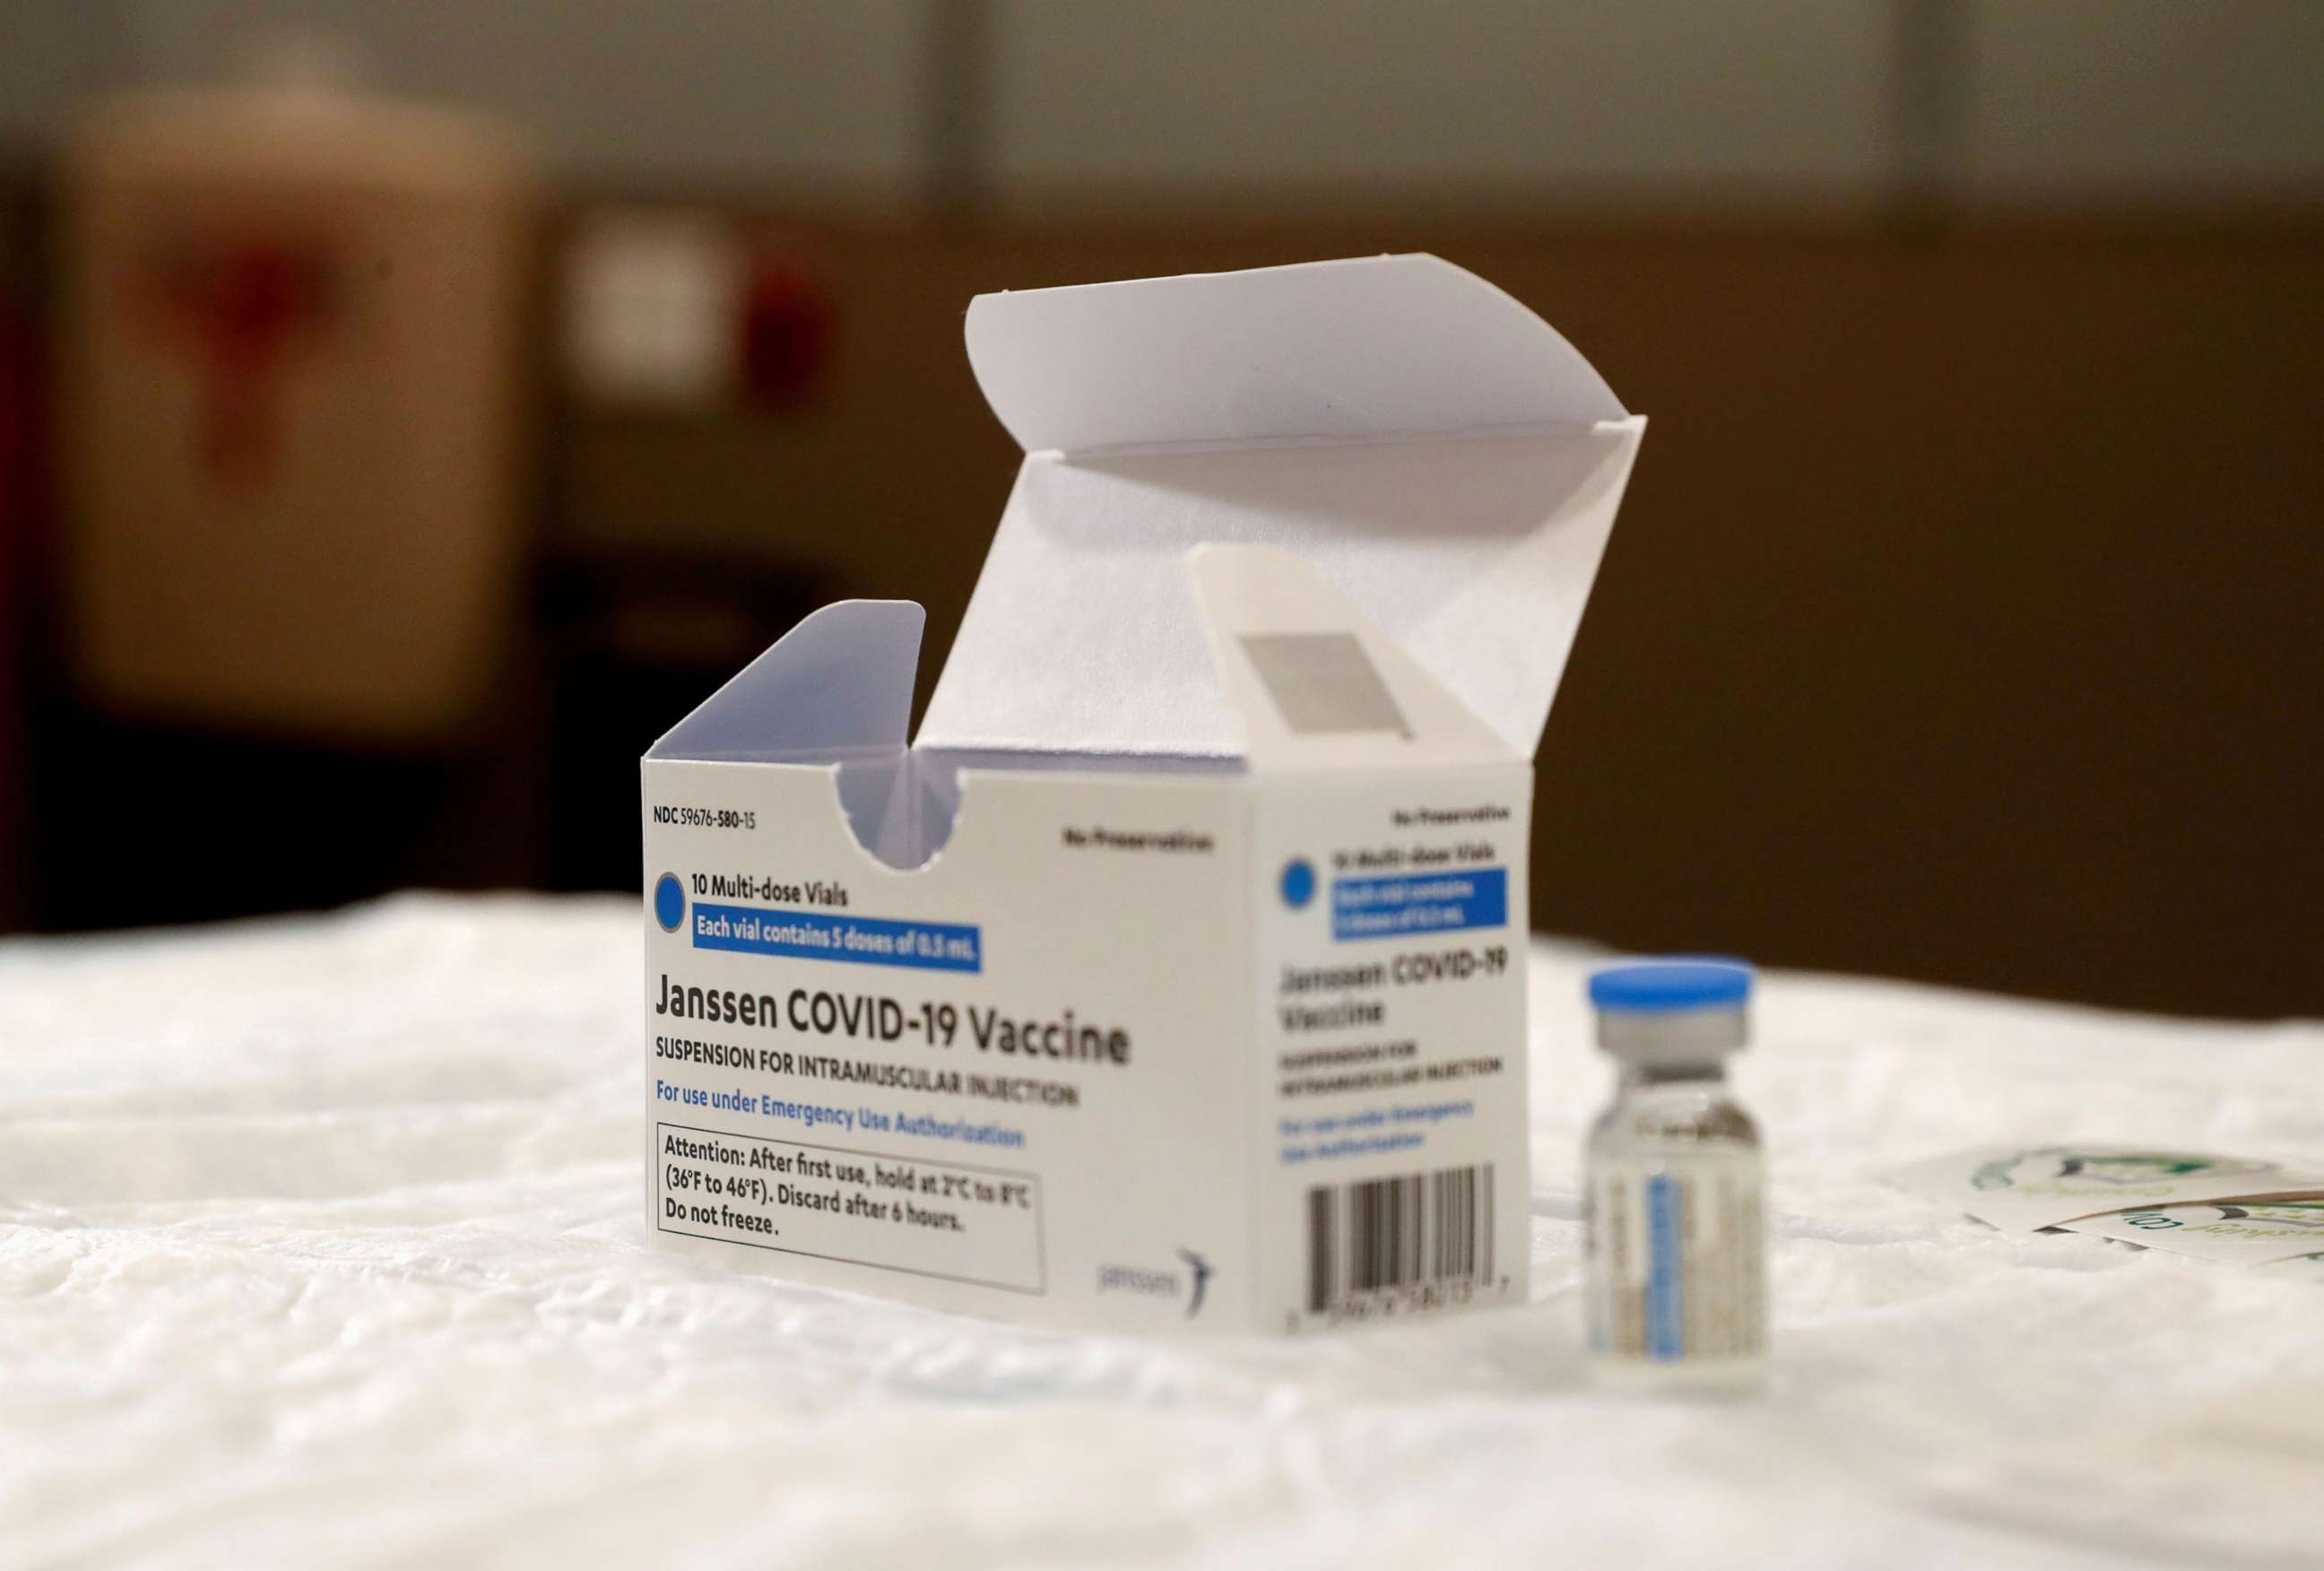 PHOTO: In this March 3, 2021, file photo, a vial of the Johnson & Johnson's COVID-19 vaccine is seen at Northwell Health's South Shore University Hospital in Bay Shore, N.Y.